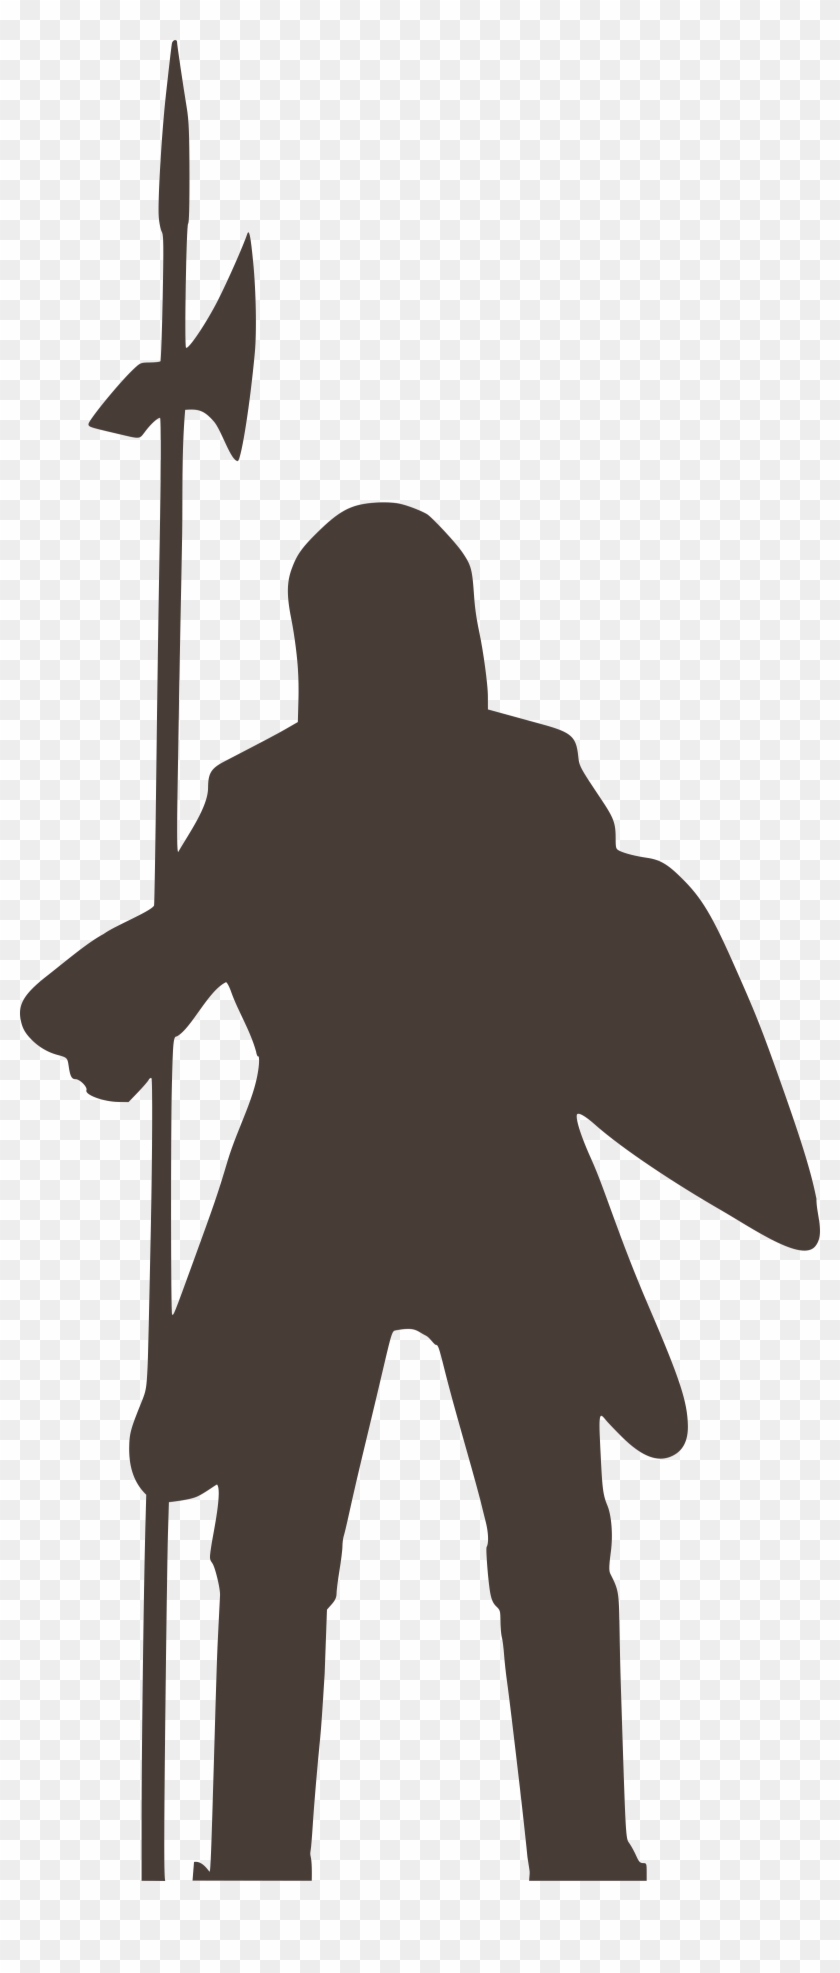 Clipart - Knight Silhouette Transparent Background #1474220